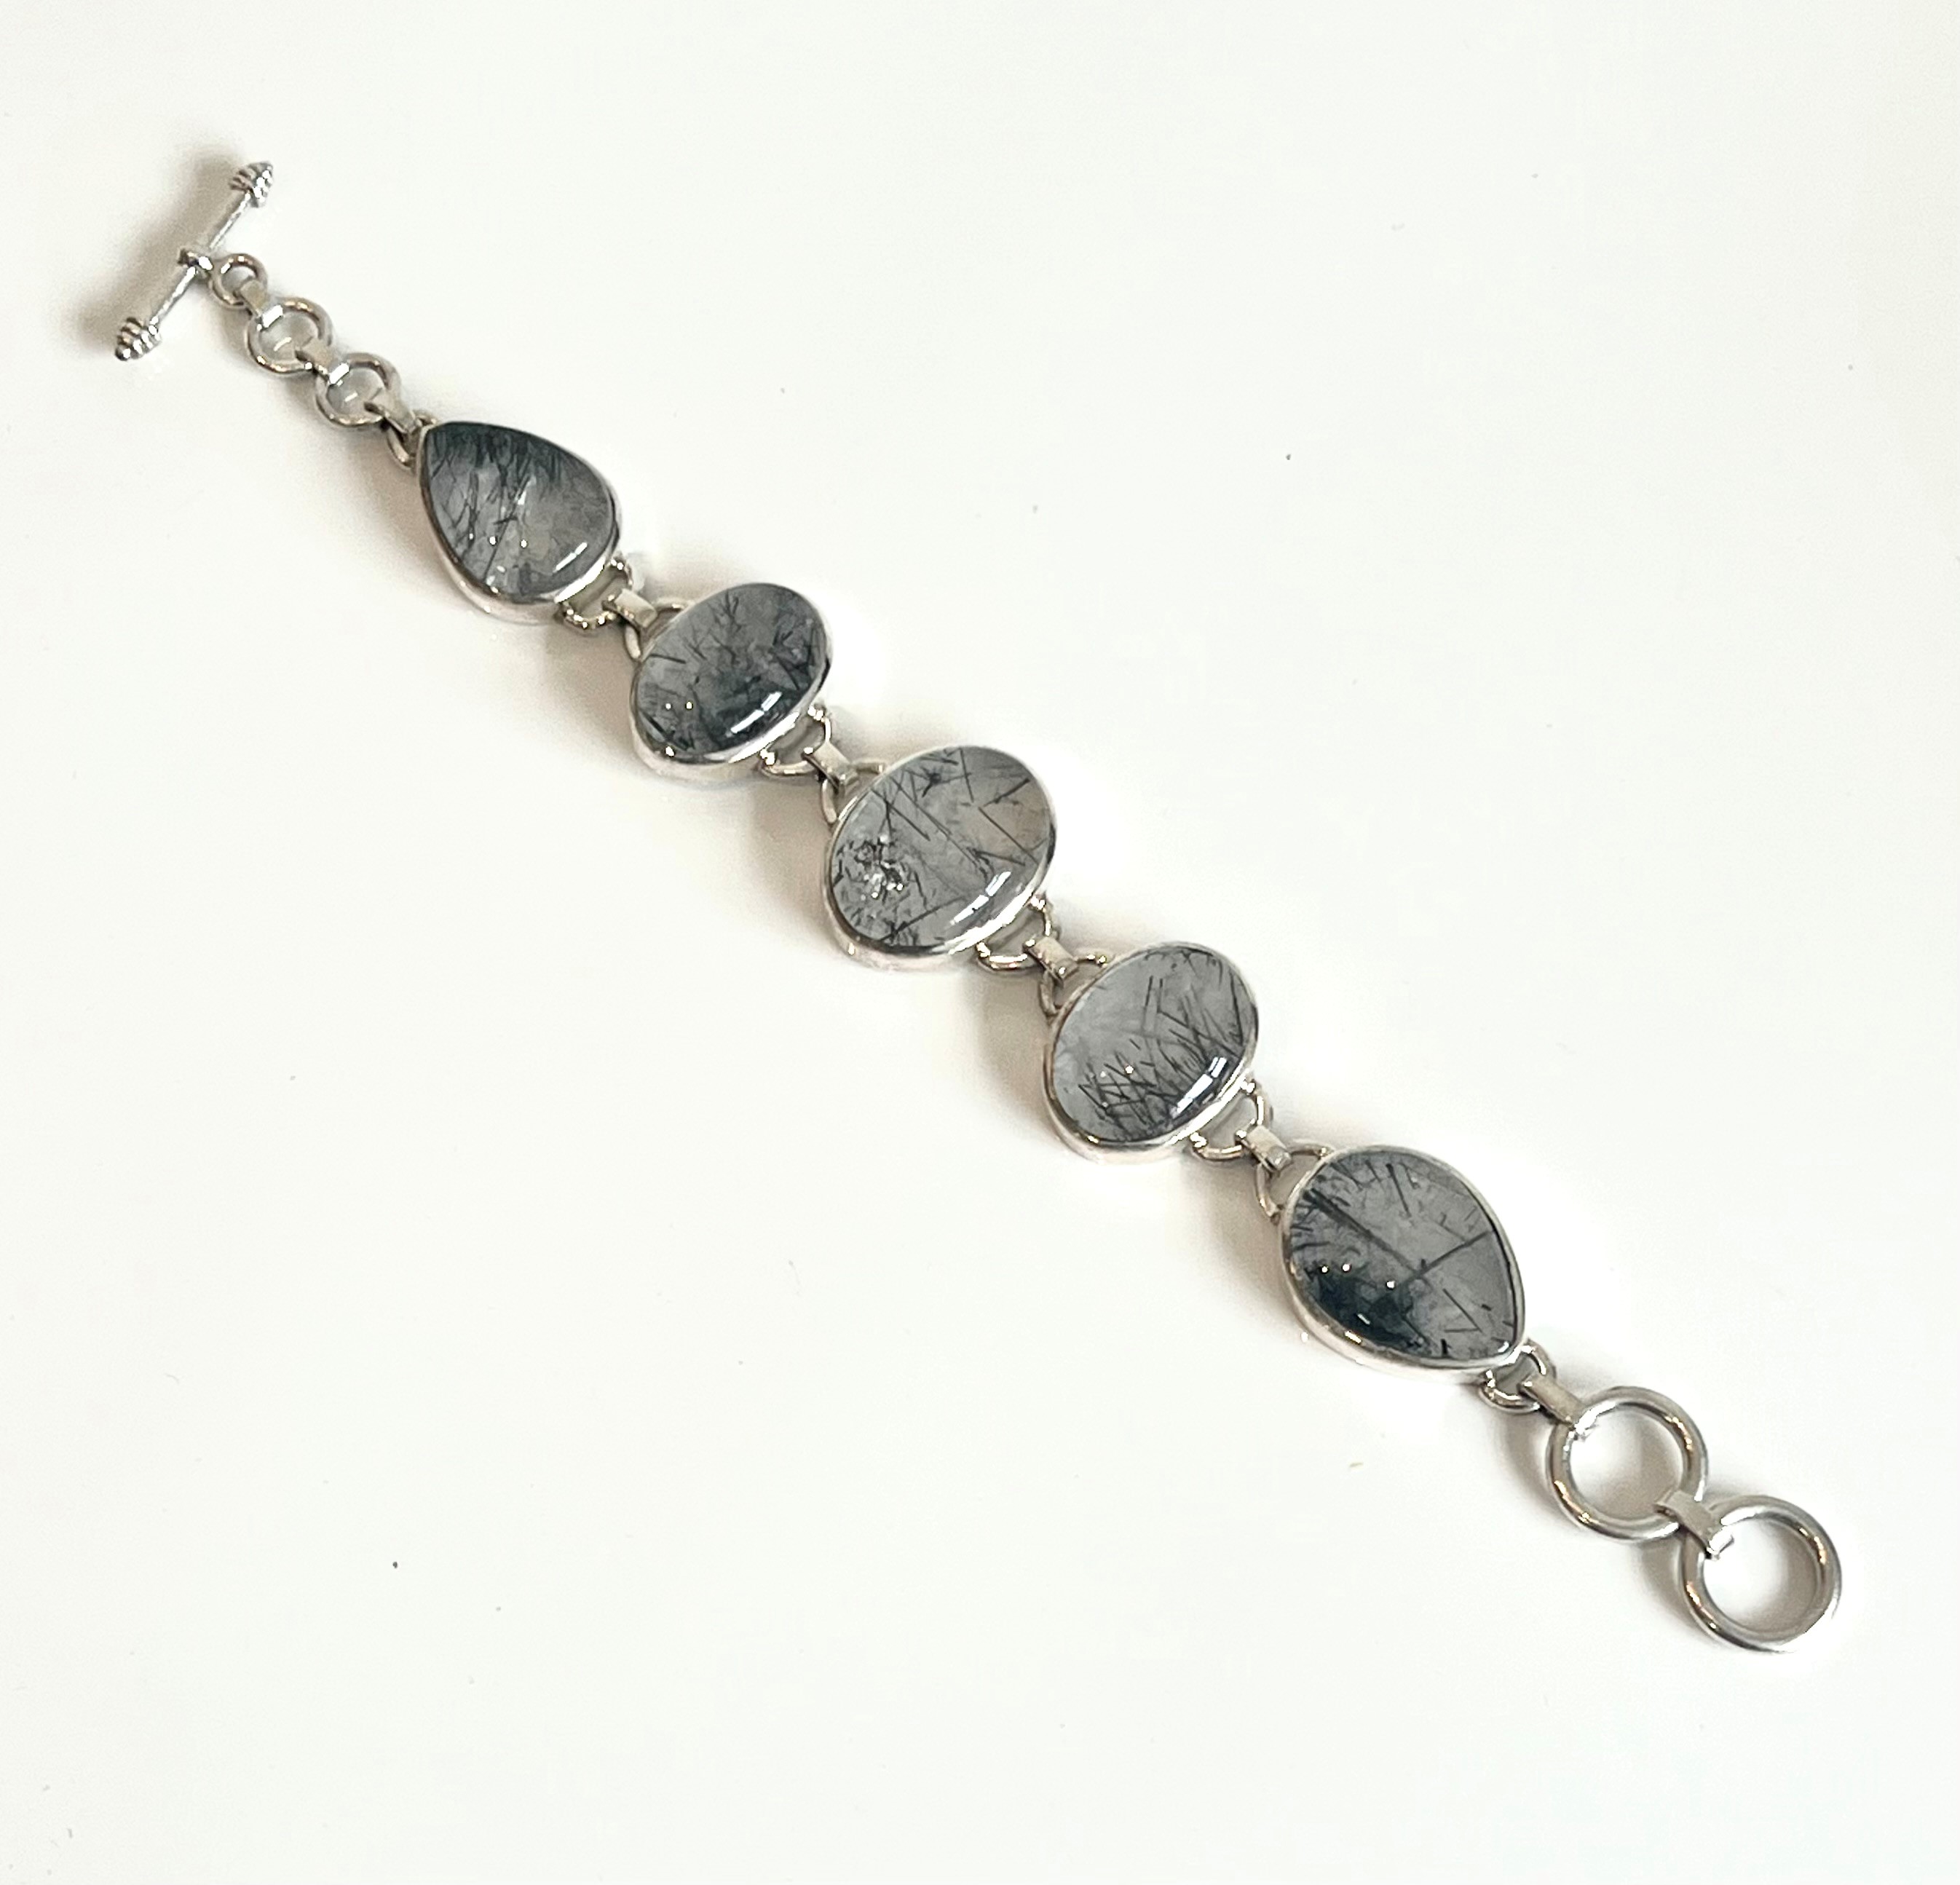 A silver and rutilated quartz bracelet - with five oval and teardrop cabochon stones in rub-over